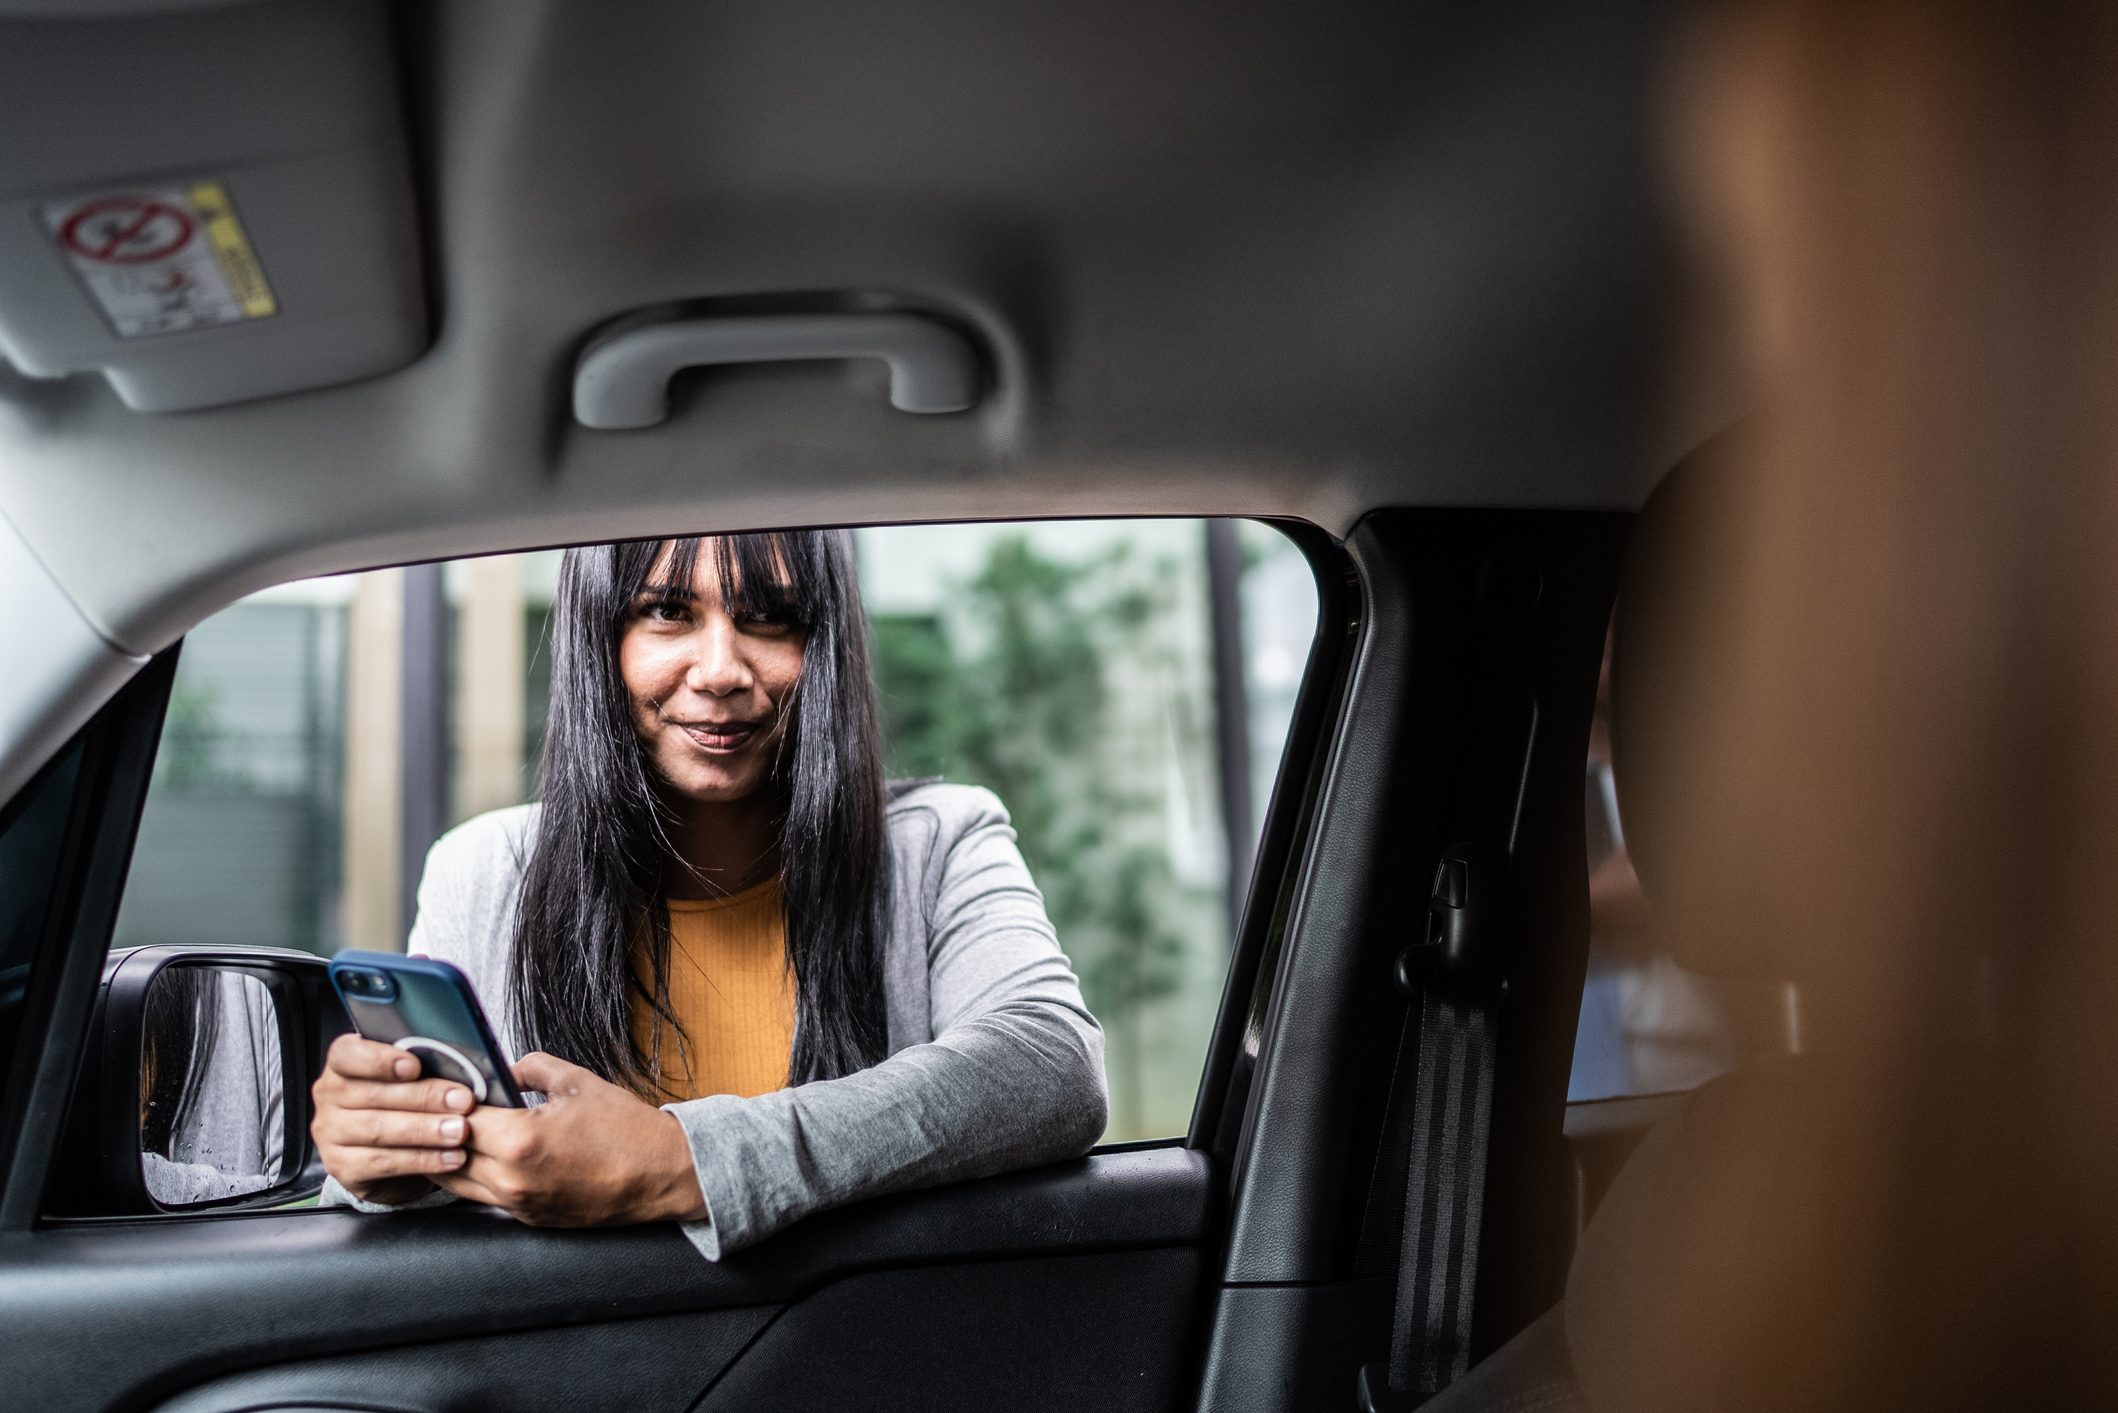 Transgender businesswoman using smartphone talking to cab driver through the car window